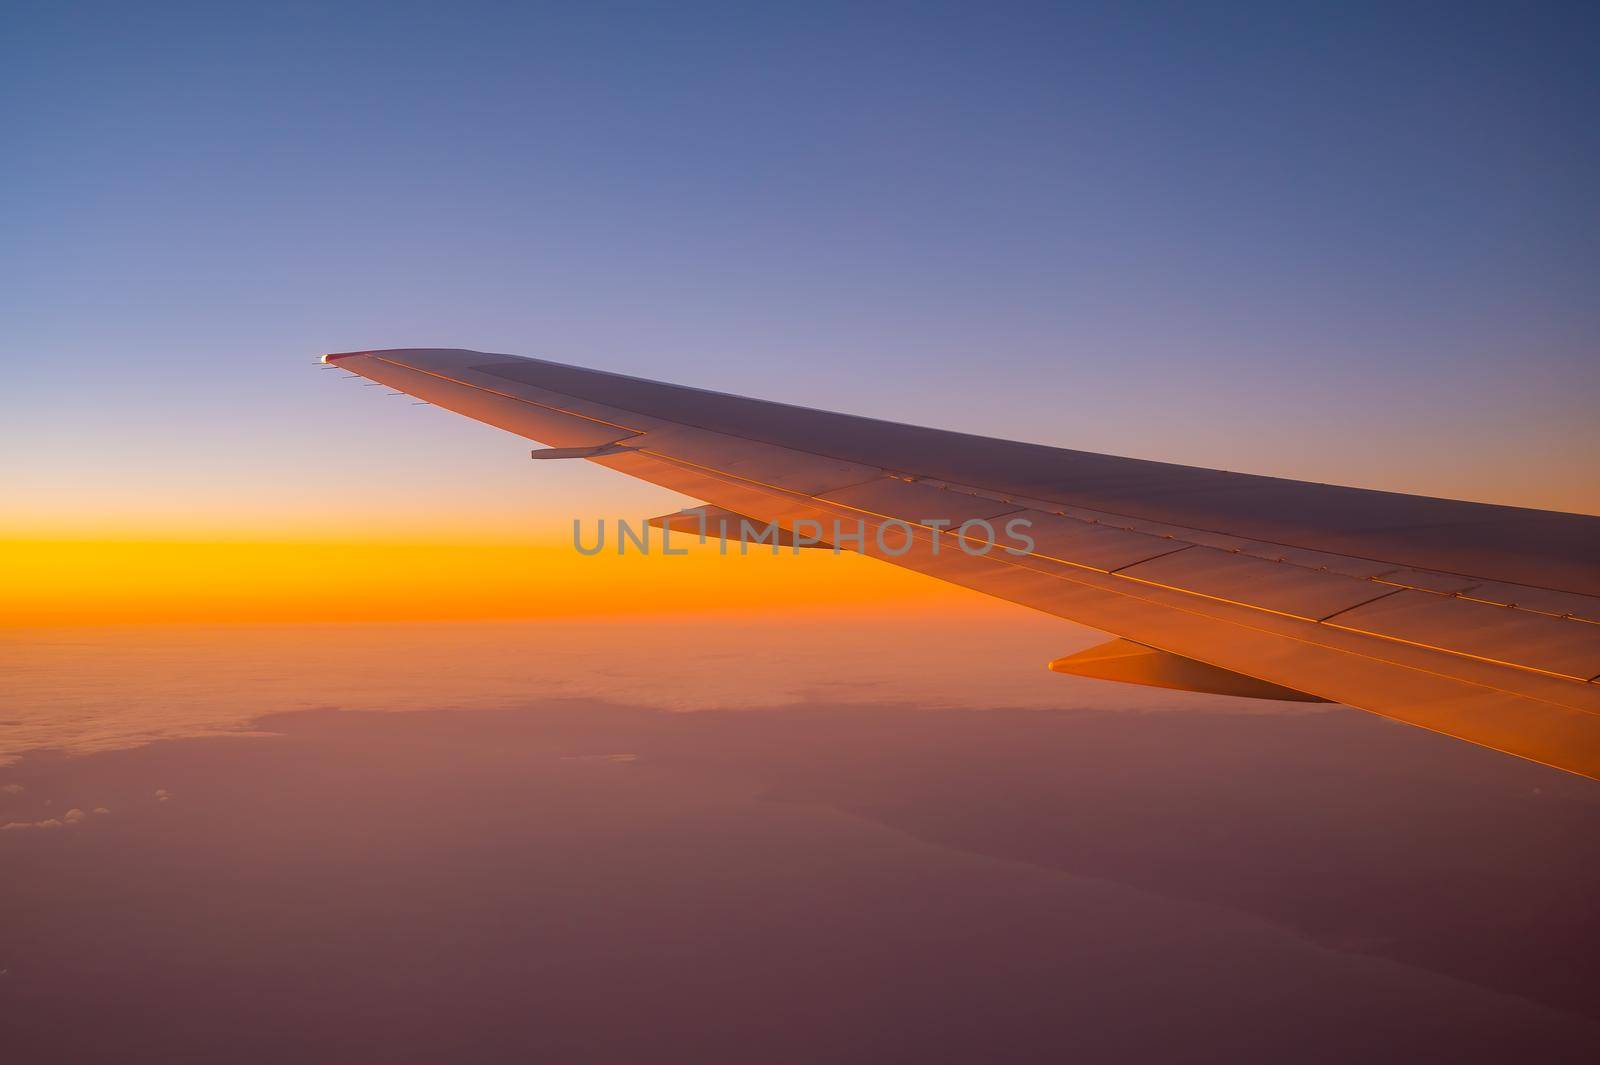 View of the wing of an airplane during flight from the window at sunset. by mrwed54